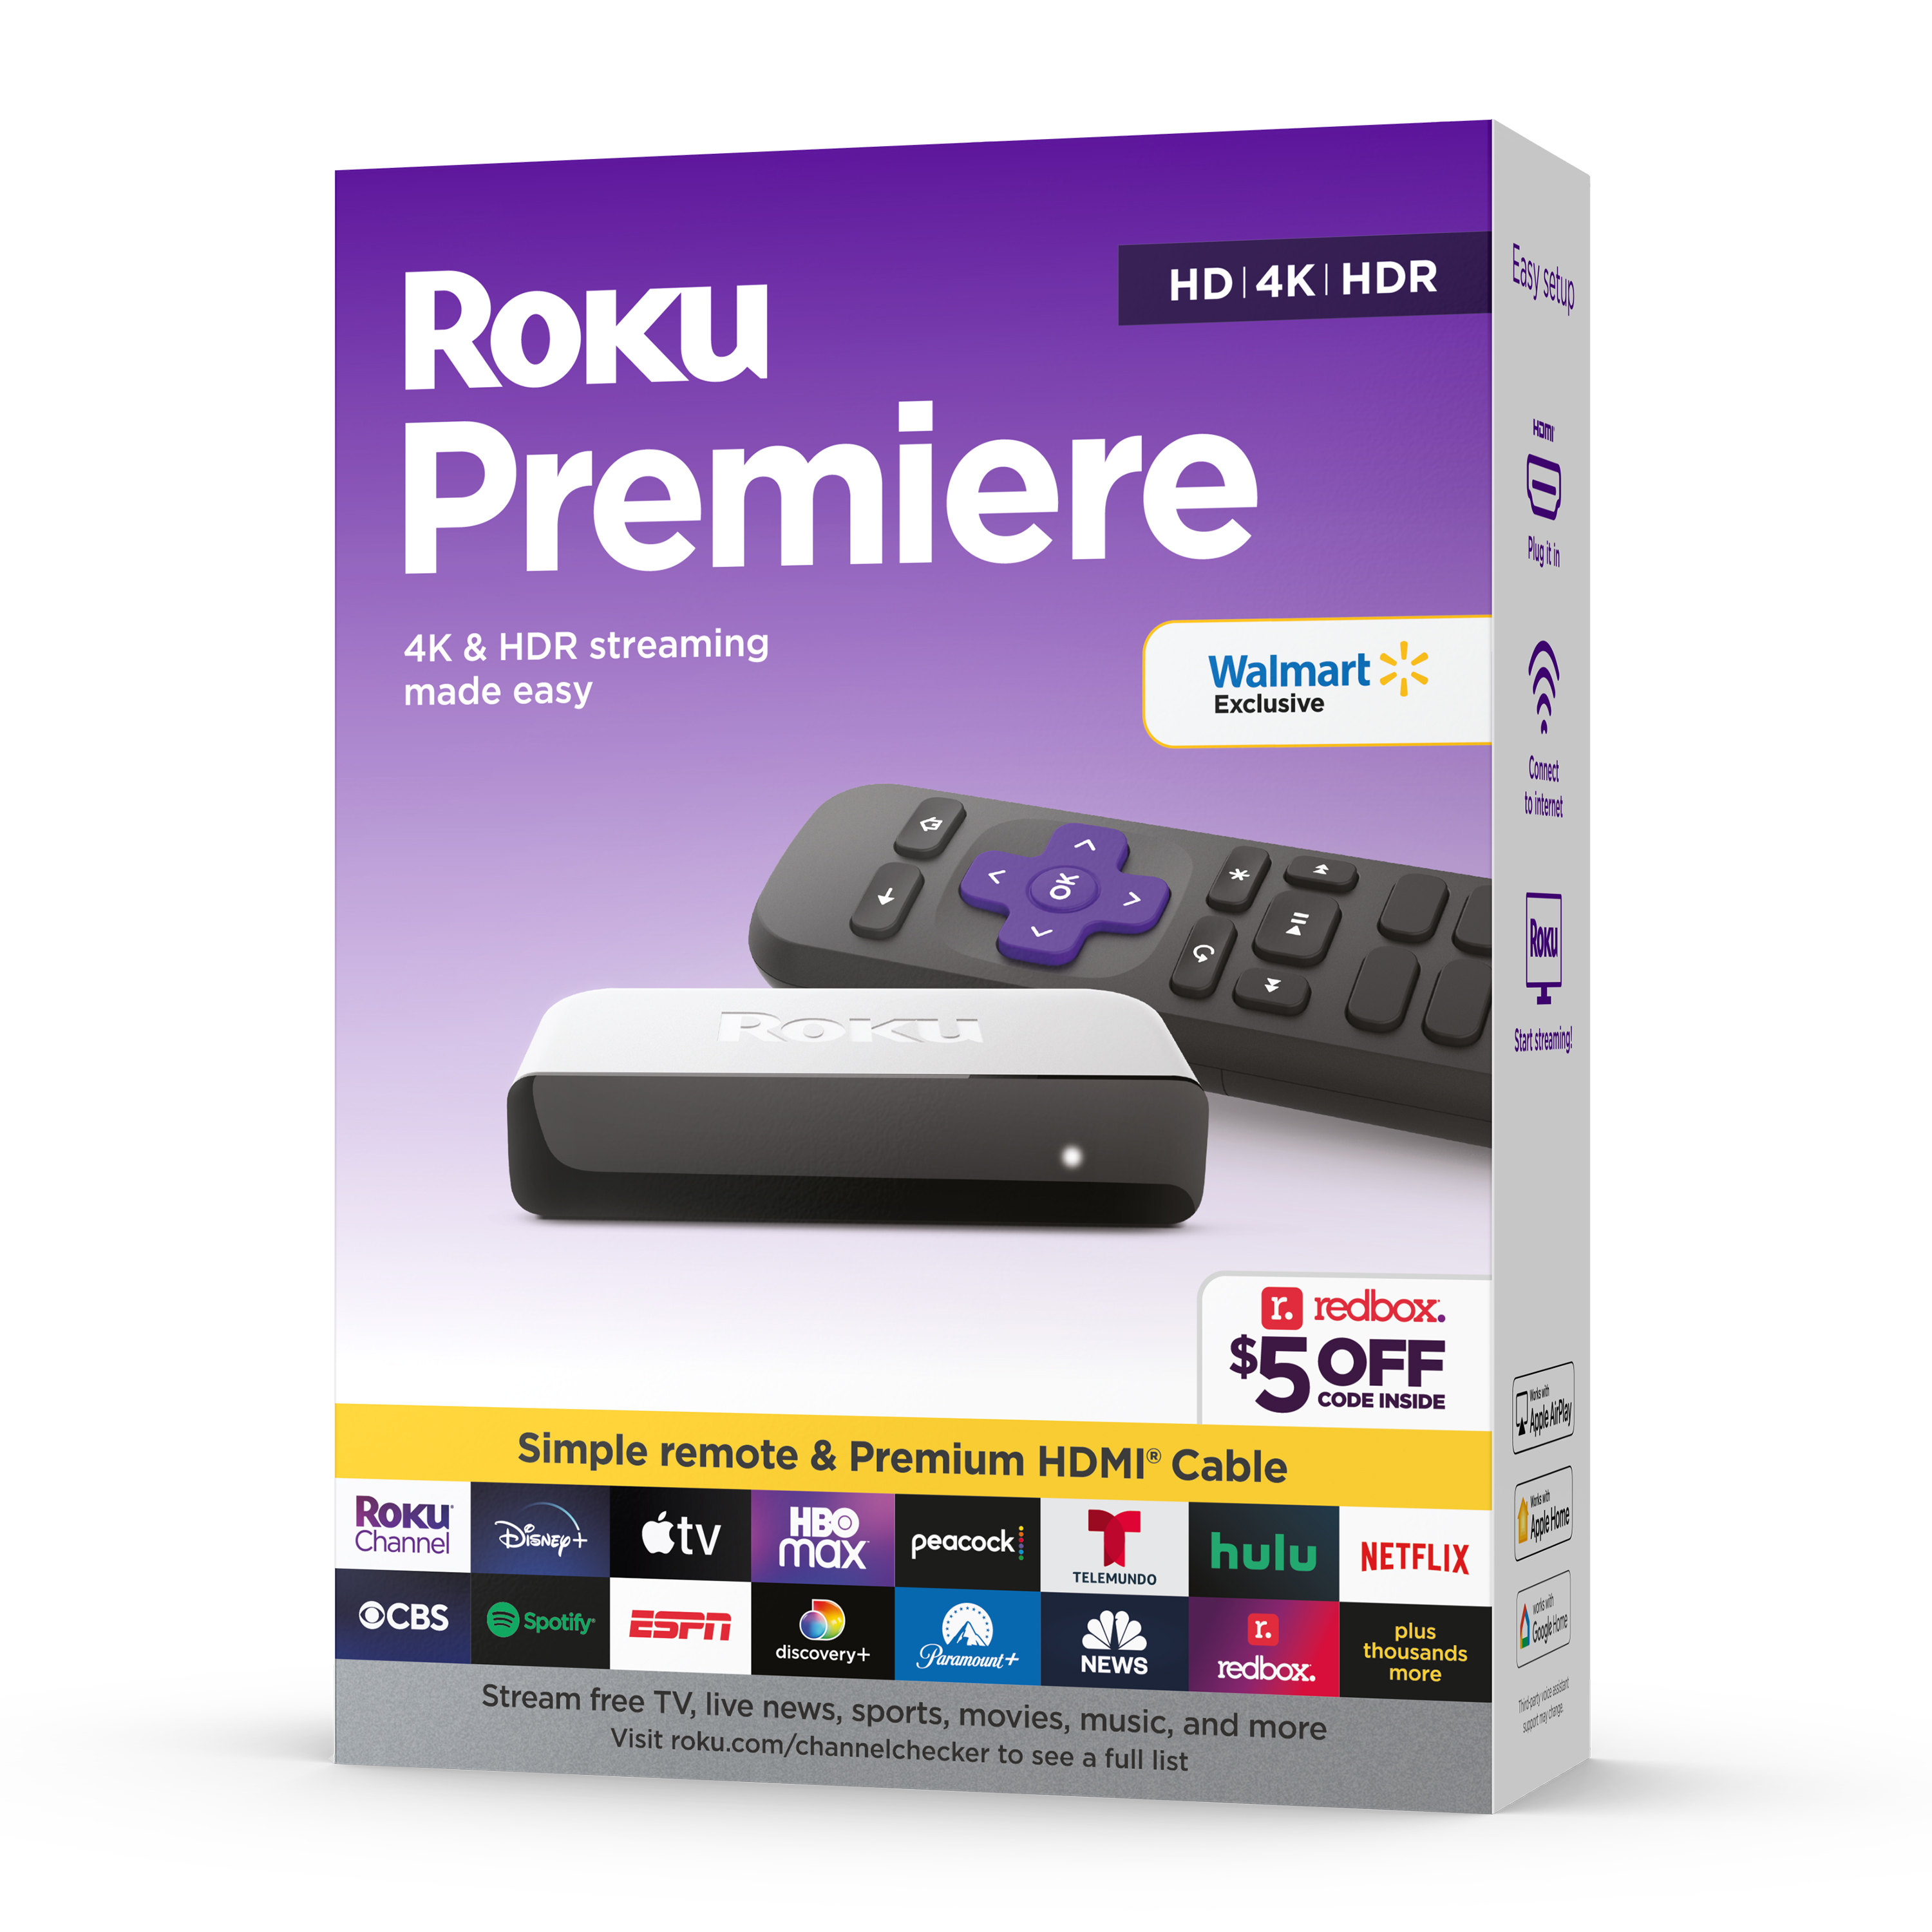 Roku Premiere | 4K/HDR Streaming Media Player Wi-Fi® Enabled with Premium High Speed HDMI® Cable and Standard Remote - image 1 of 8